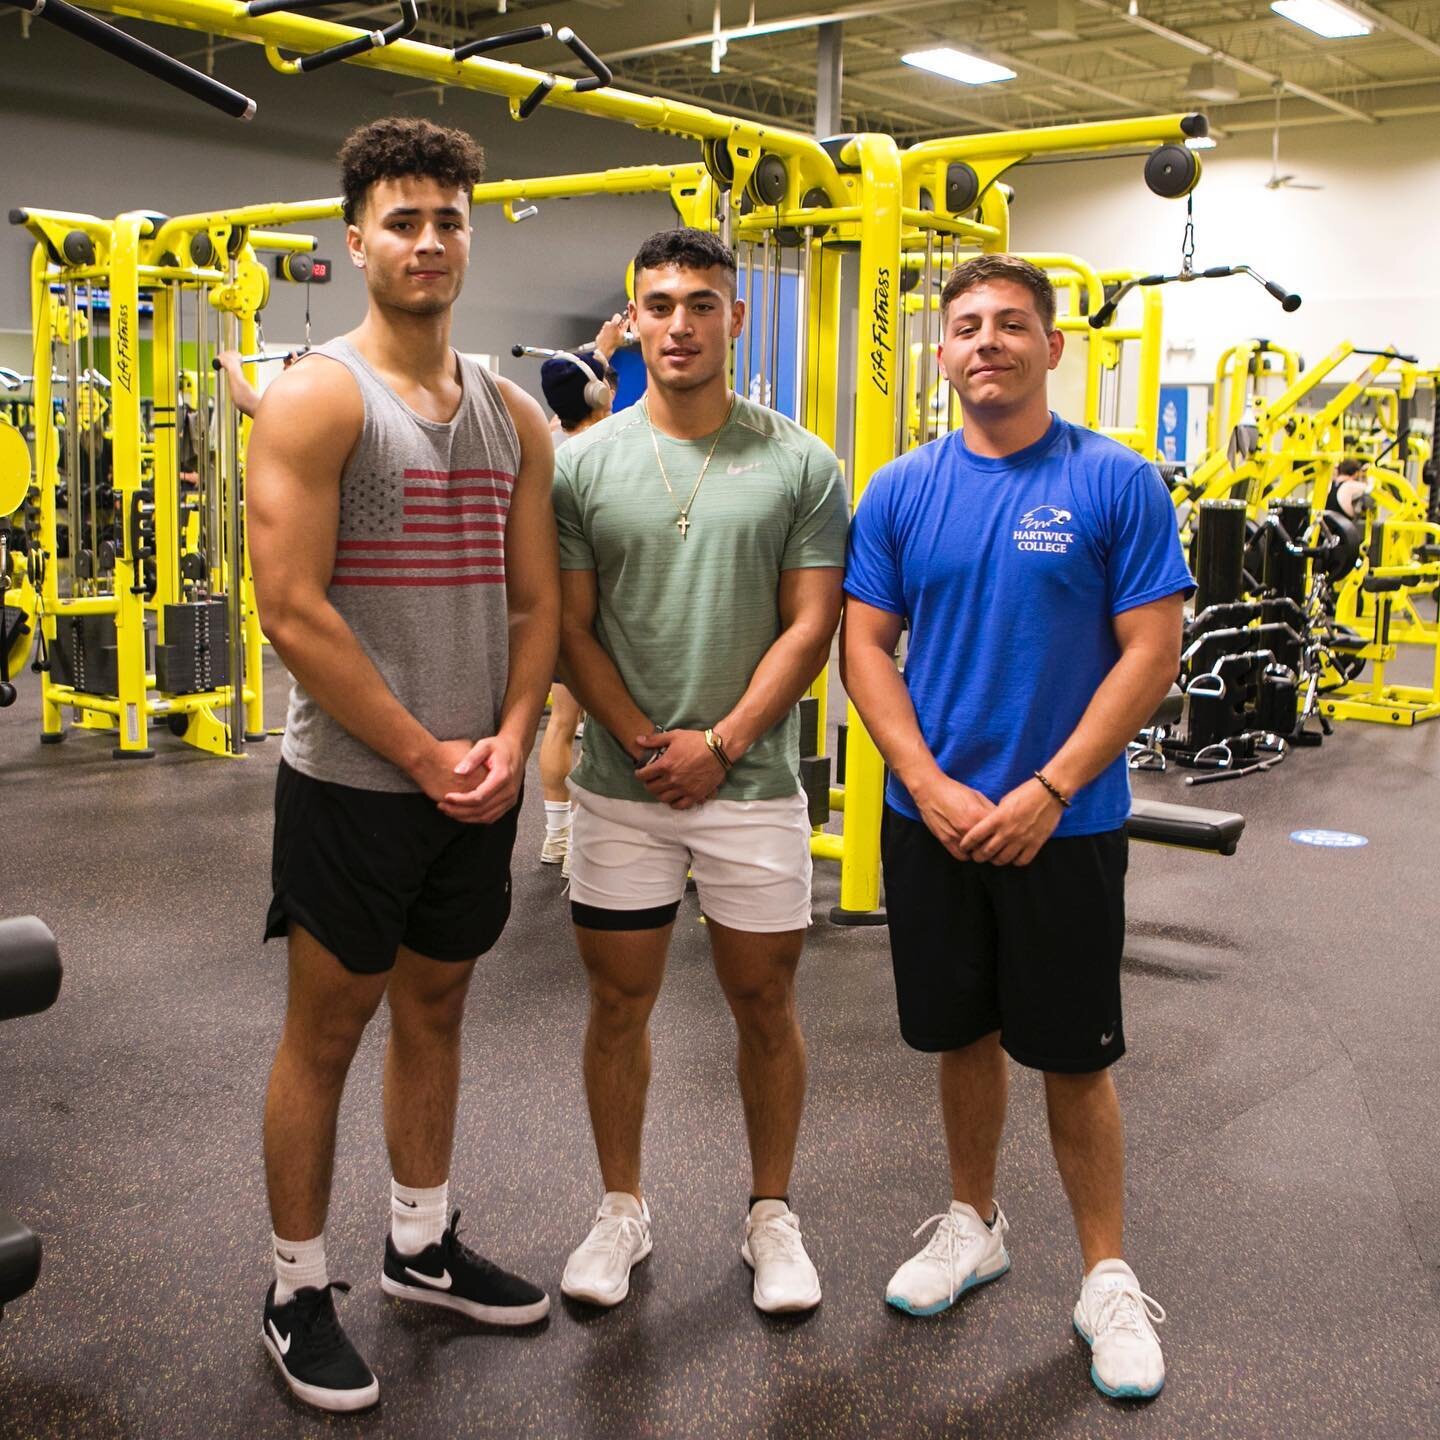 Our awesome members Conor @connorpaik, Vinny @vinny.maddz and Ian @ianmoralesss completing their strength training circuit! 💪💪💪

Refer a friend and get $10 on your prepaid account when they sign up! It&rsquo;s always more fun and motivation when y